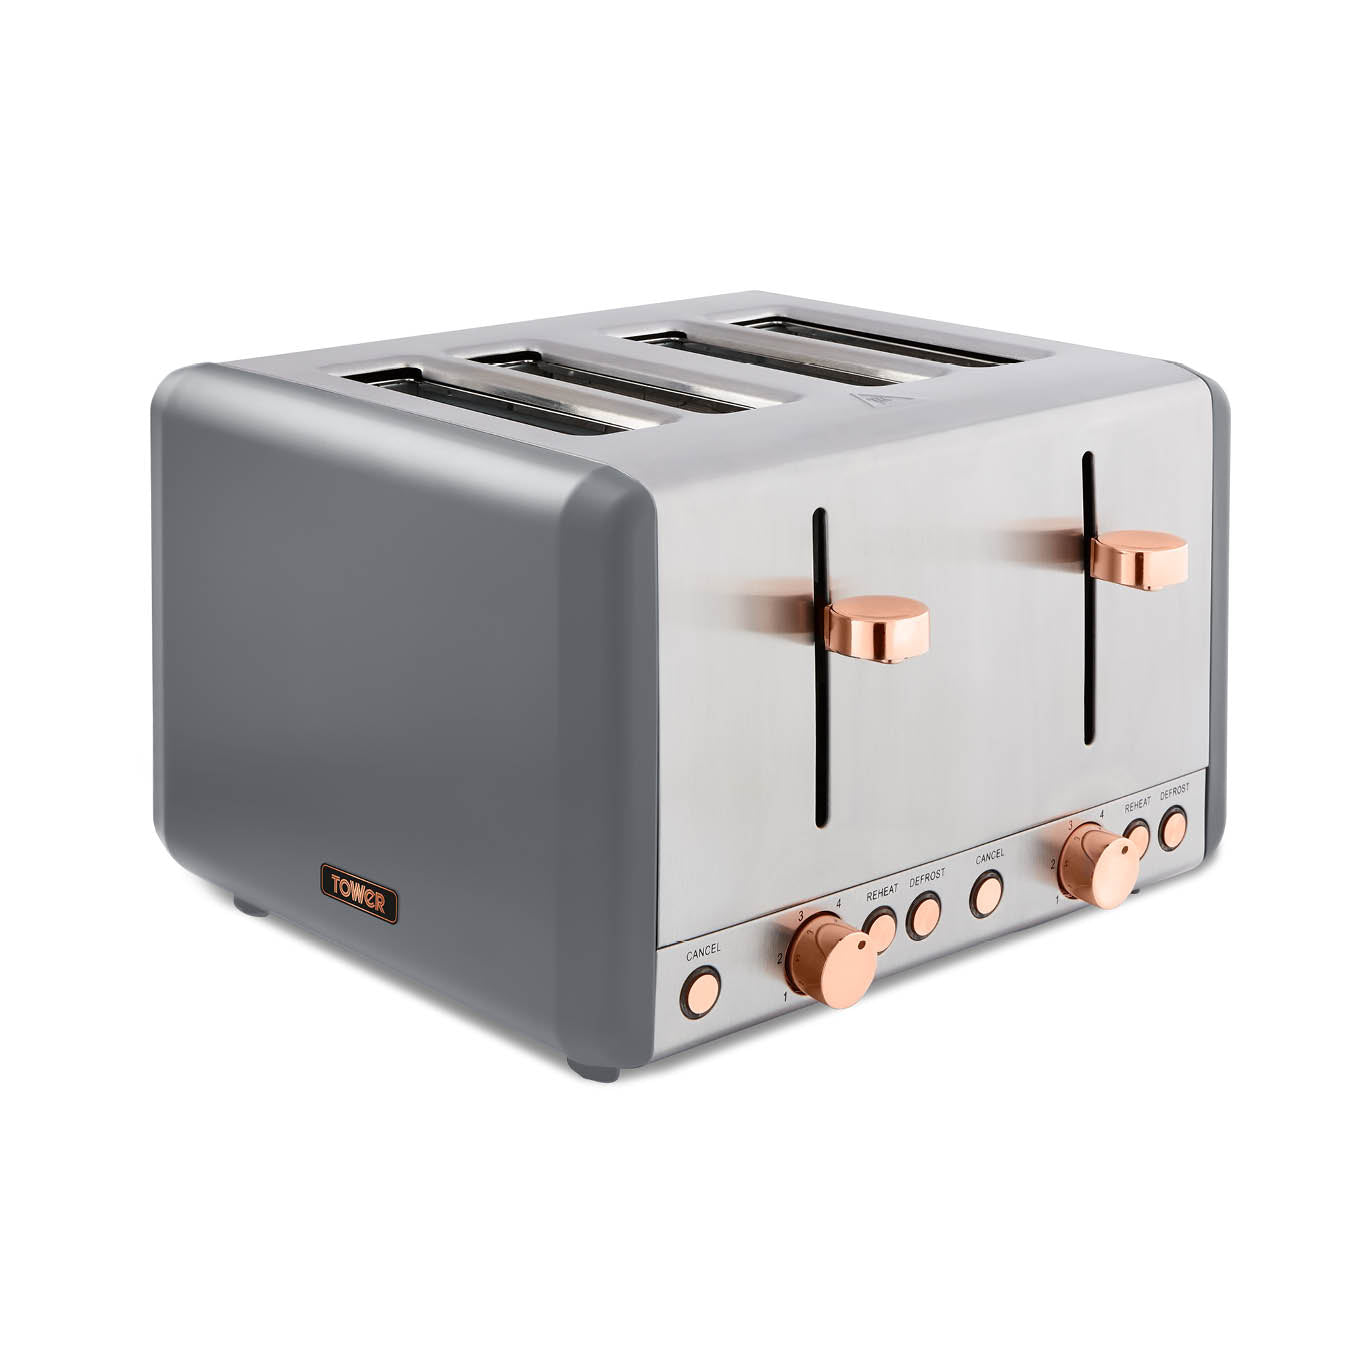 Tower Cavaletto 4 Slice Stainless Steel Toaster - Grey